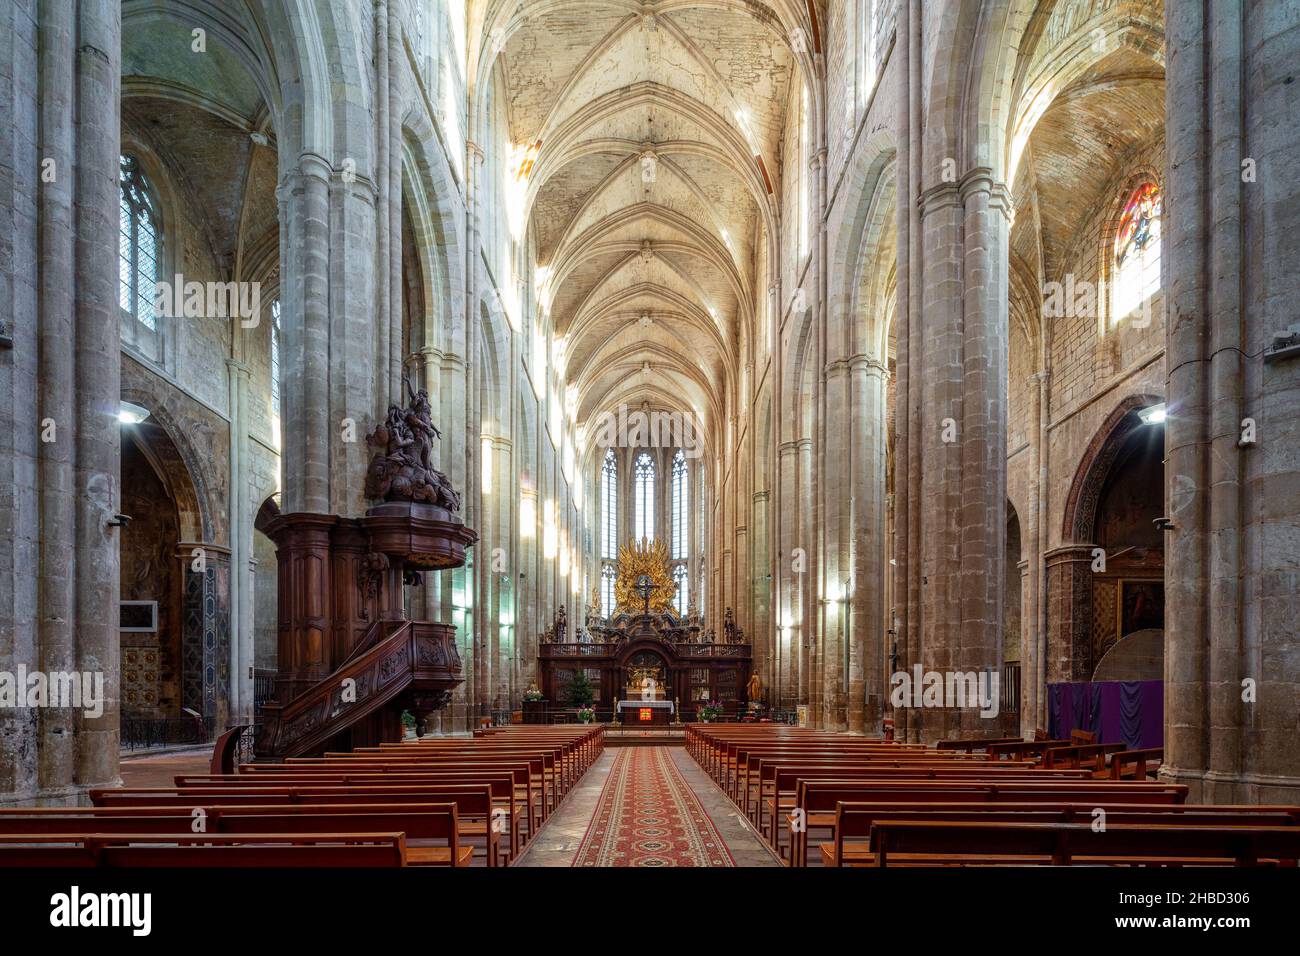 France, Var (83) Saint-Maximin-la-Sainte-Baume, The Sainte-Marie-Madeleine basilica, started in 1295 and completed in 1532, is the most important Goth Stock Photo